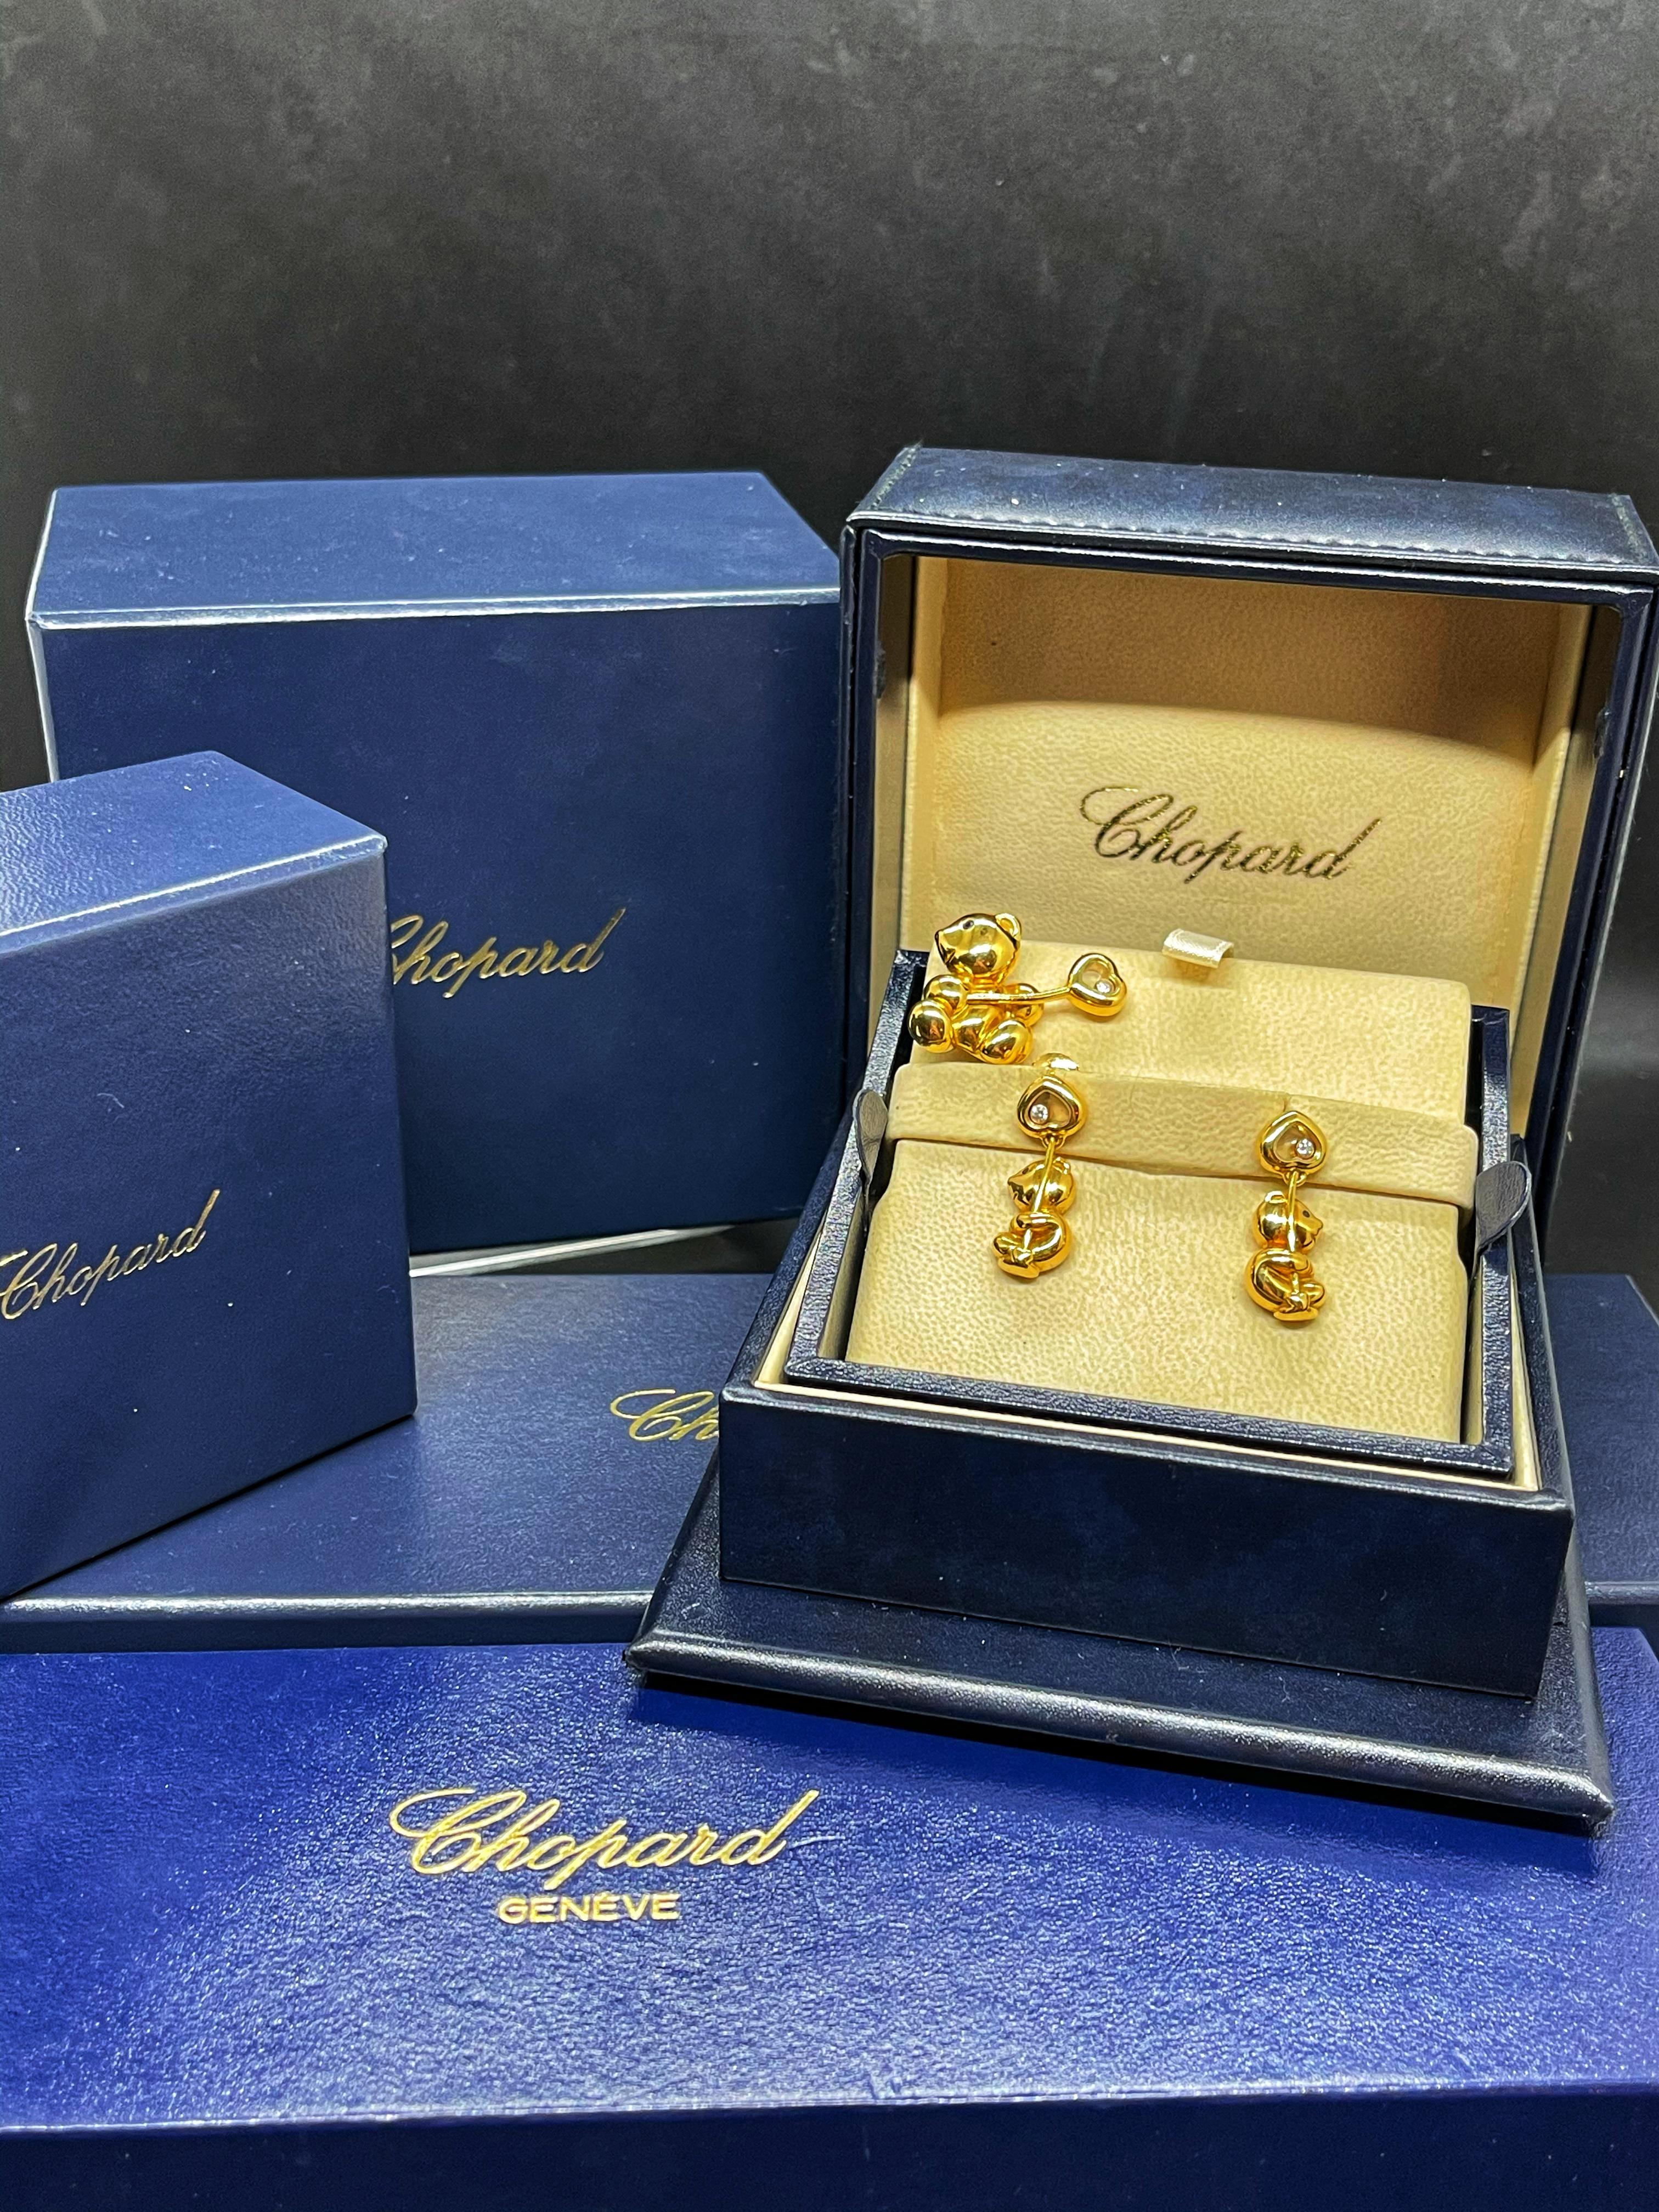 An extremely rare 18 K diamond set, designed by Chopard with earrings and pendant, which makes a part of the timeless Happy Diamonds collection designed in the shape of the bears with balloons. This set combines an original design and classical